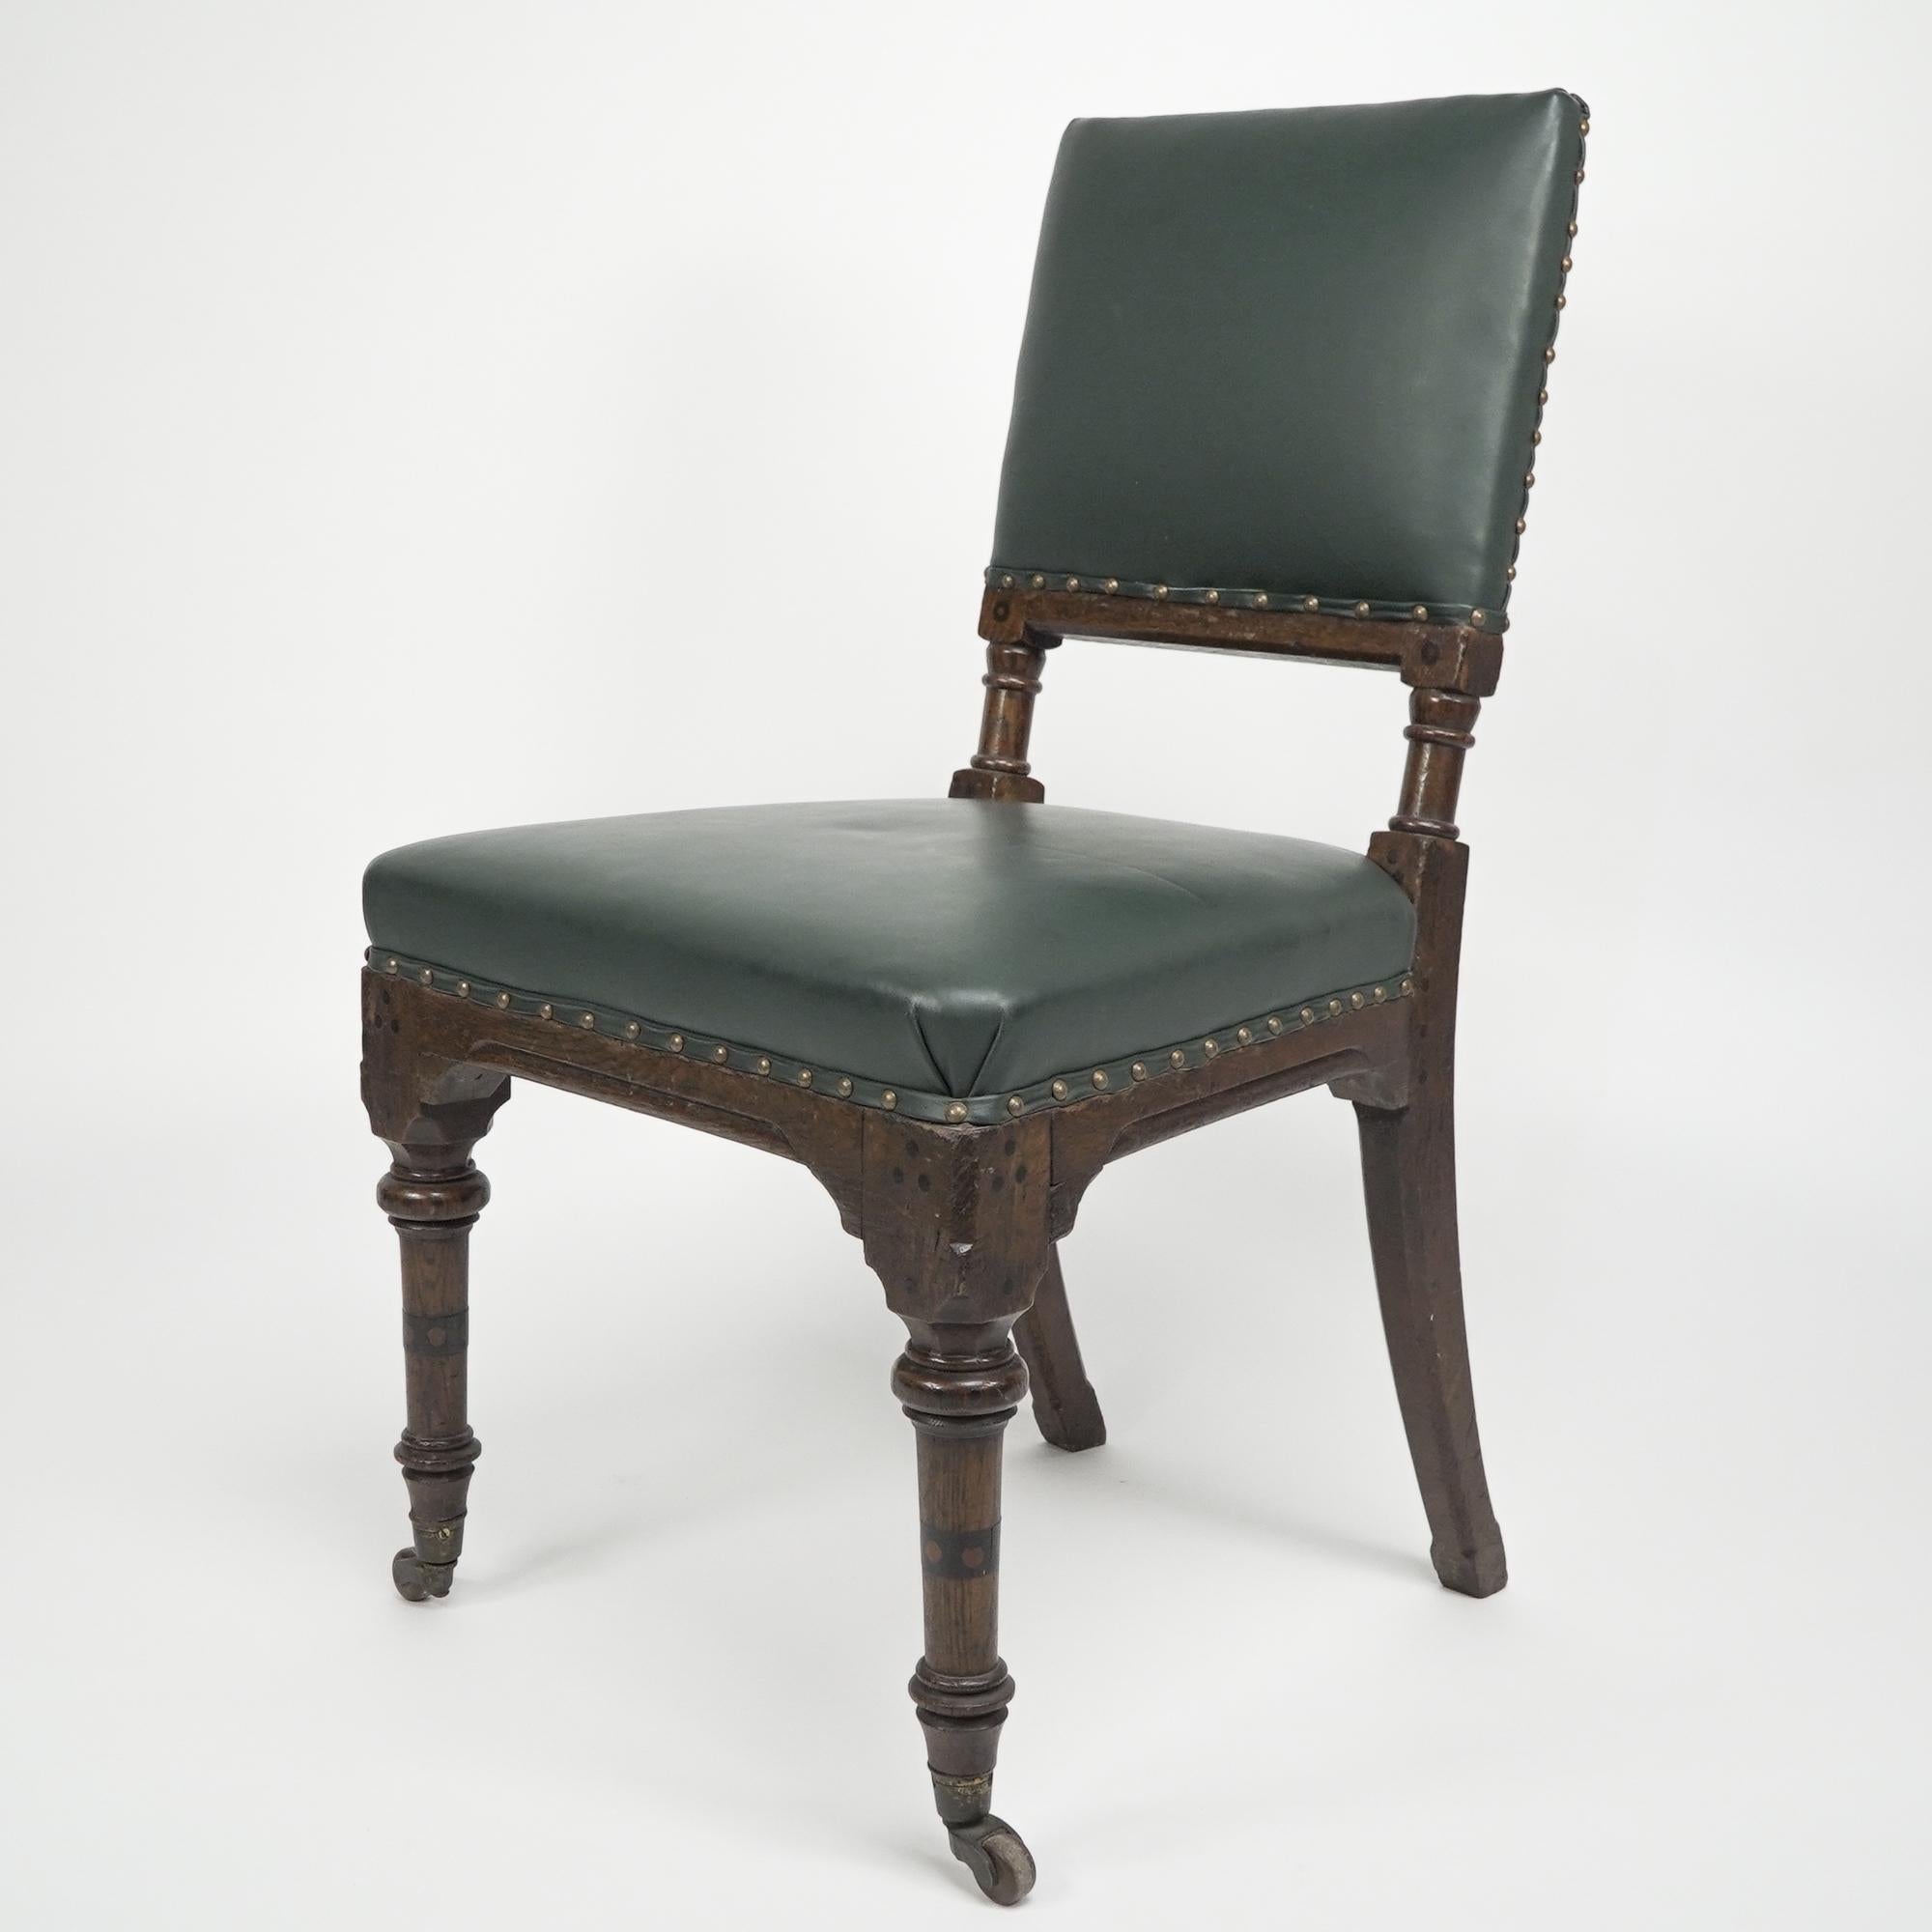 Charles Bevan attributed. A gothic Revival side chair with chamfered edges, and ebonized dot decoration to the lower back, and to the front and back seat corners. With ring turned supports below the upholstered back and a nice scroll details around